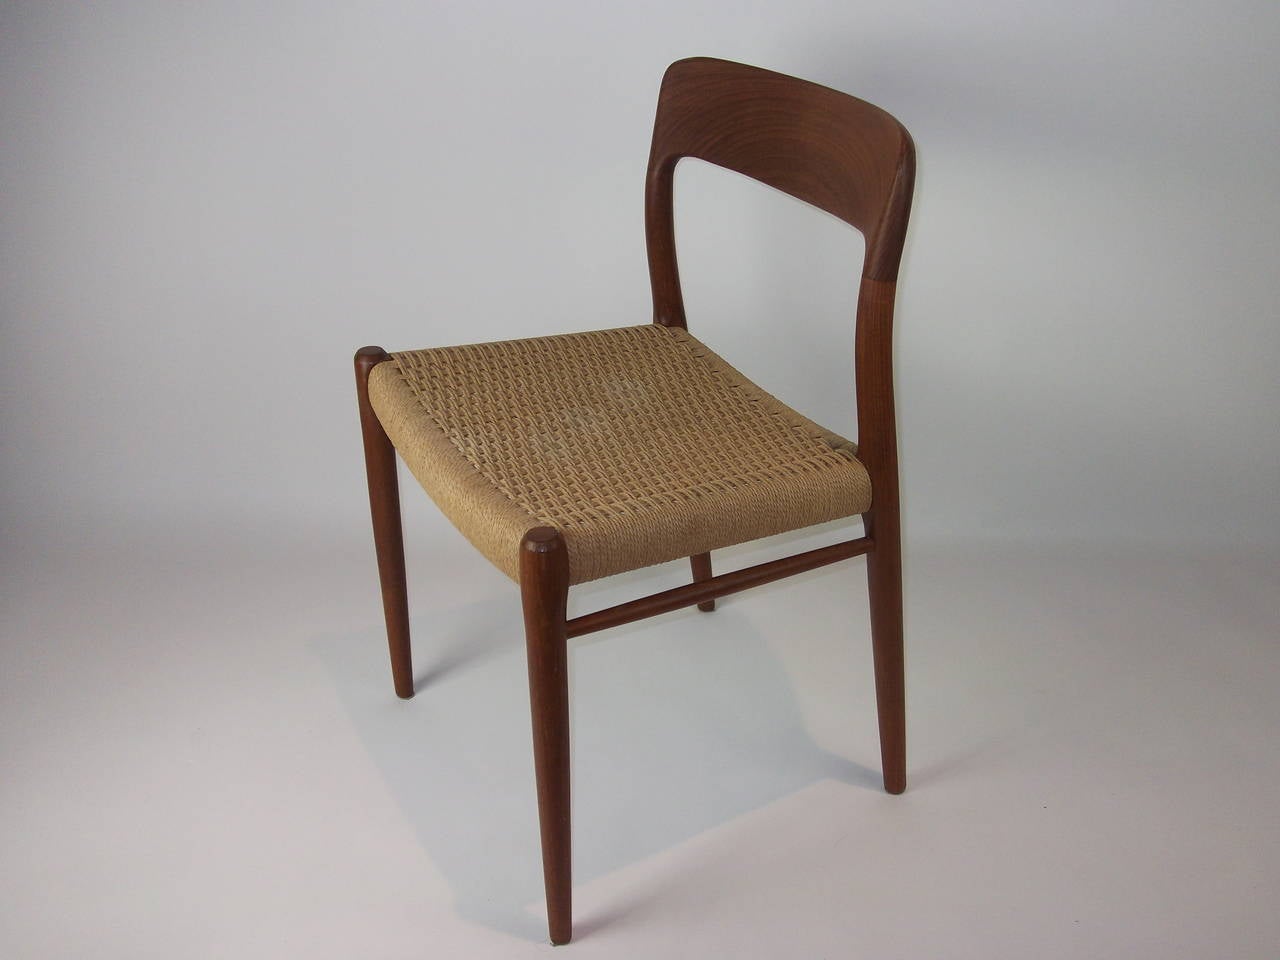 One lonely J.L Moller chair - designed by Niels Moller - chair model #75 - very good vintage condition - gorgeous patina - incredible craftsmanship - design year 1954 - made in Denmark